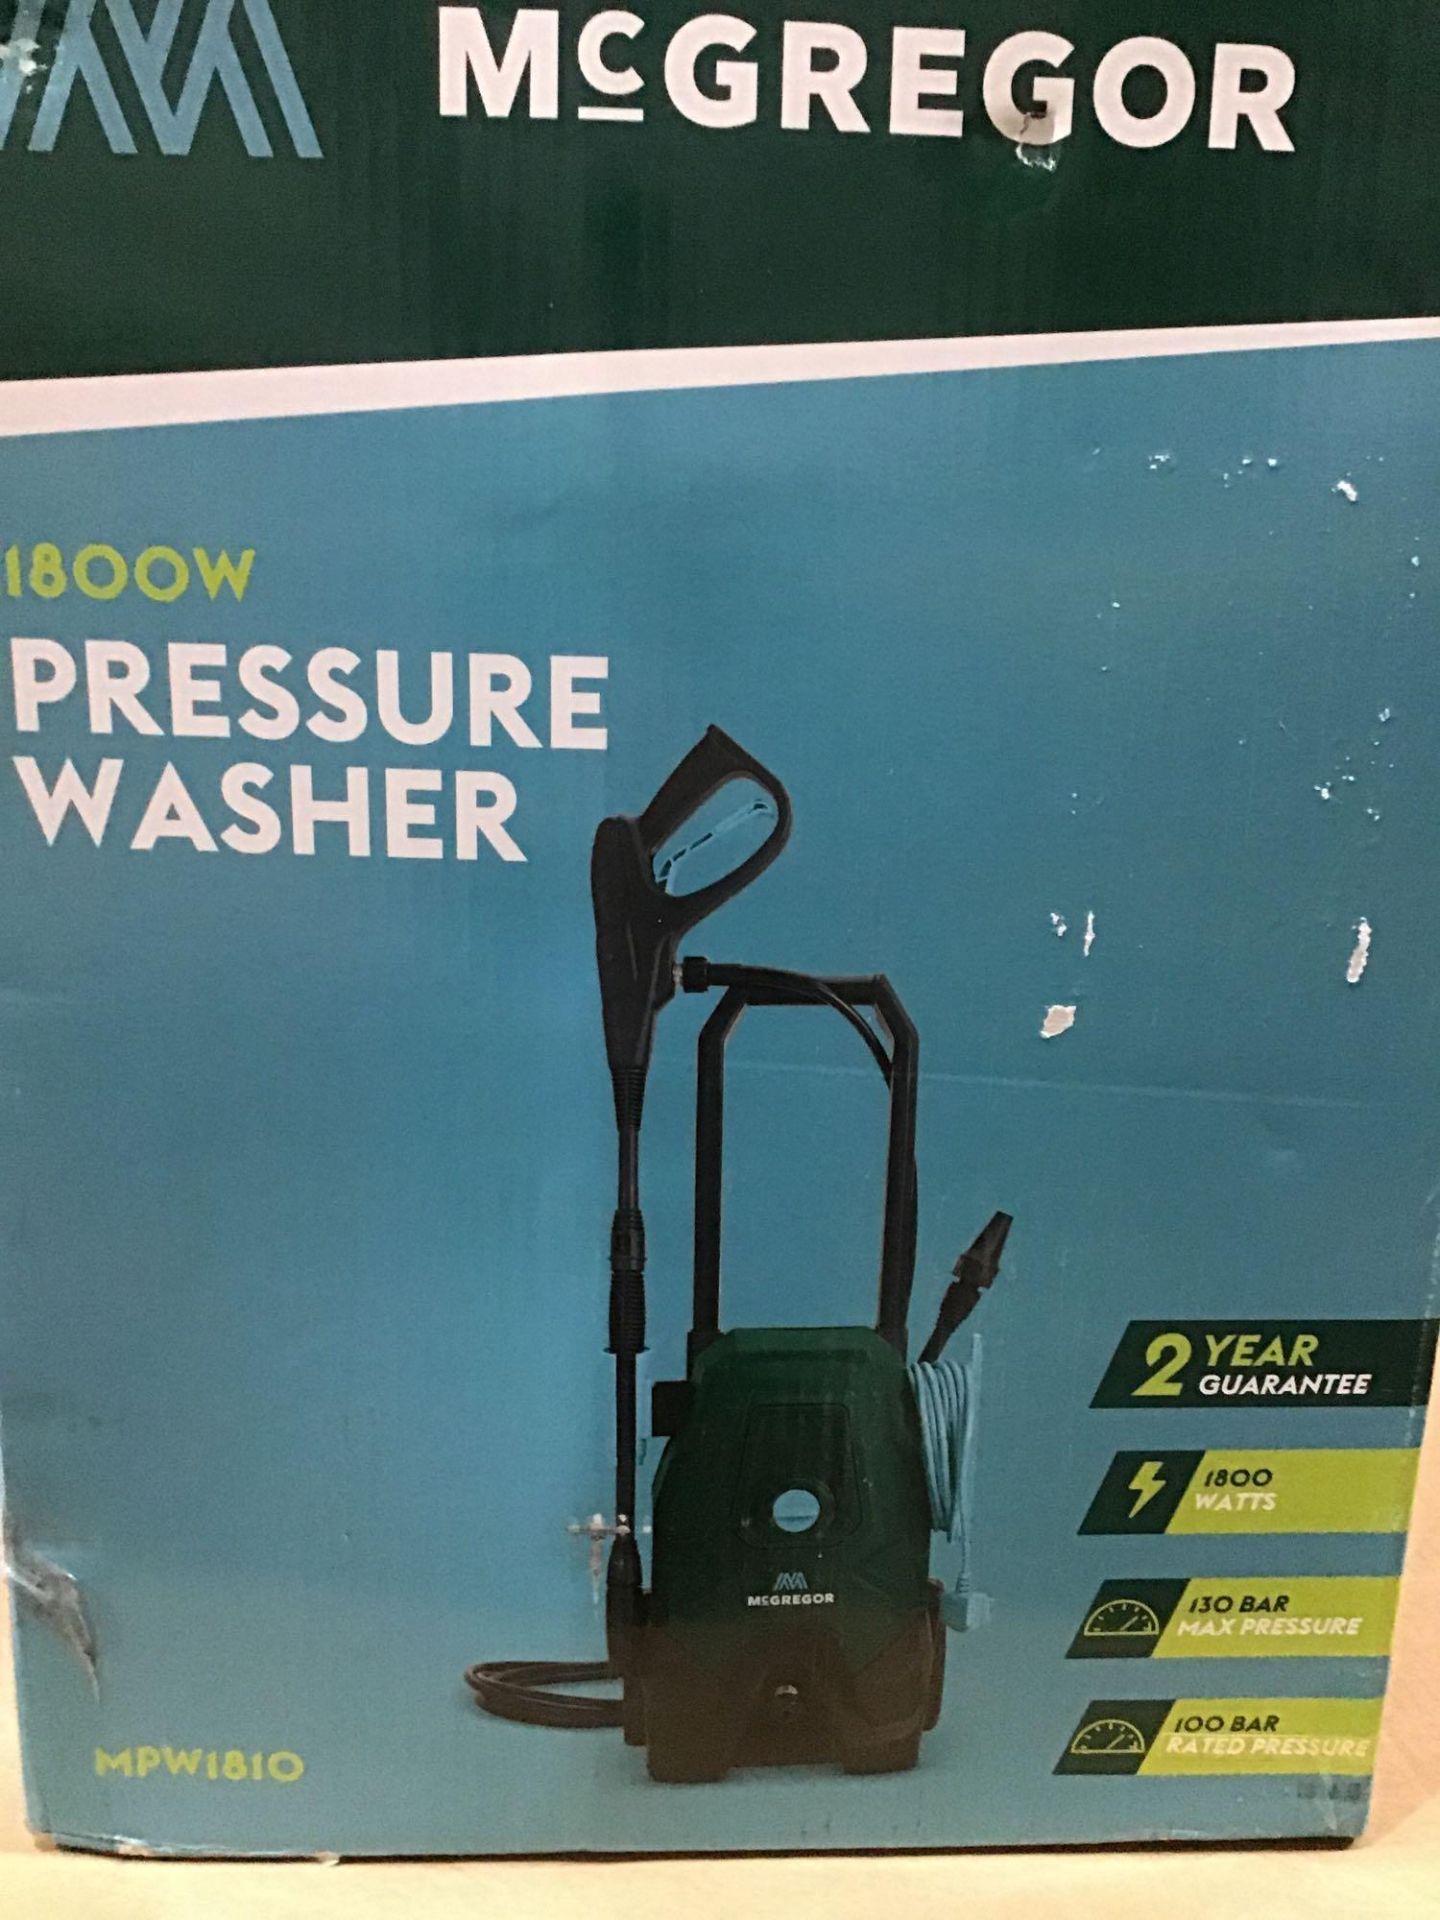 McGregor Pressure Washer - 1800W MPW1810 £80.00 RRP - Image 2 of 5